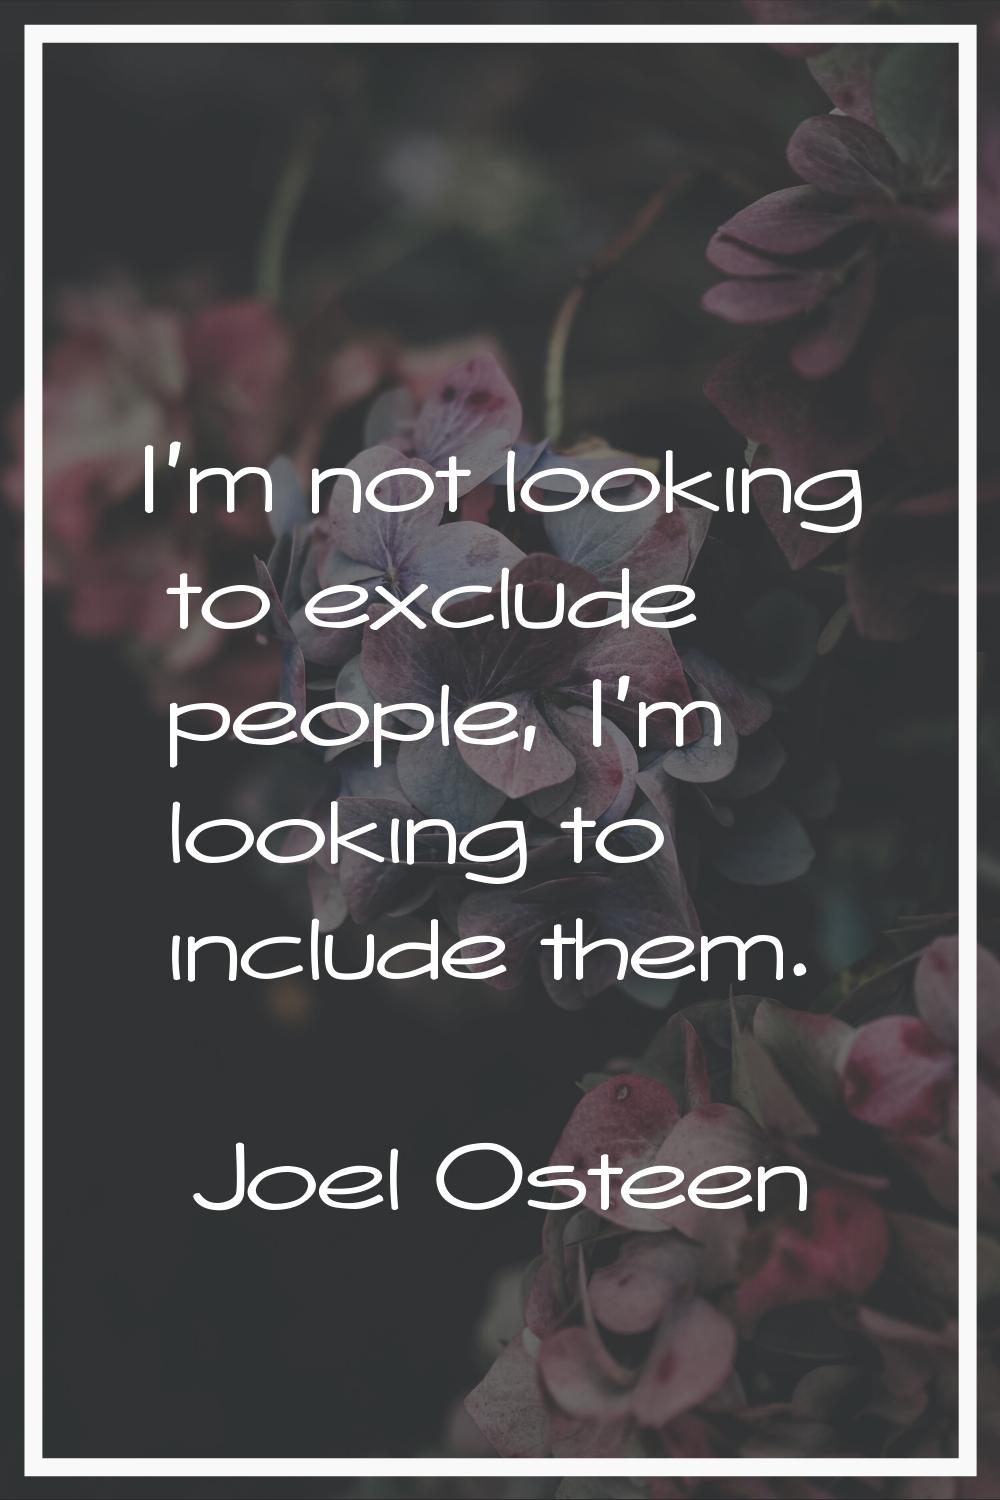 I'm not looking to exclude people, I'm looking to include them.